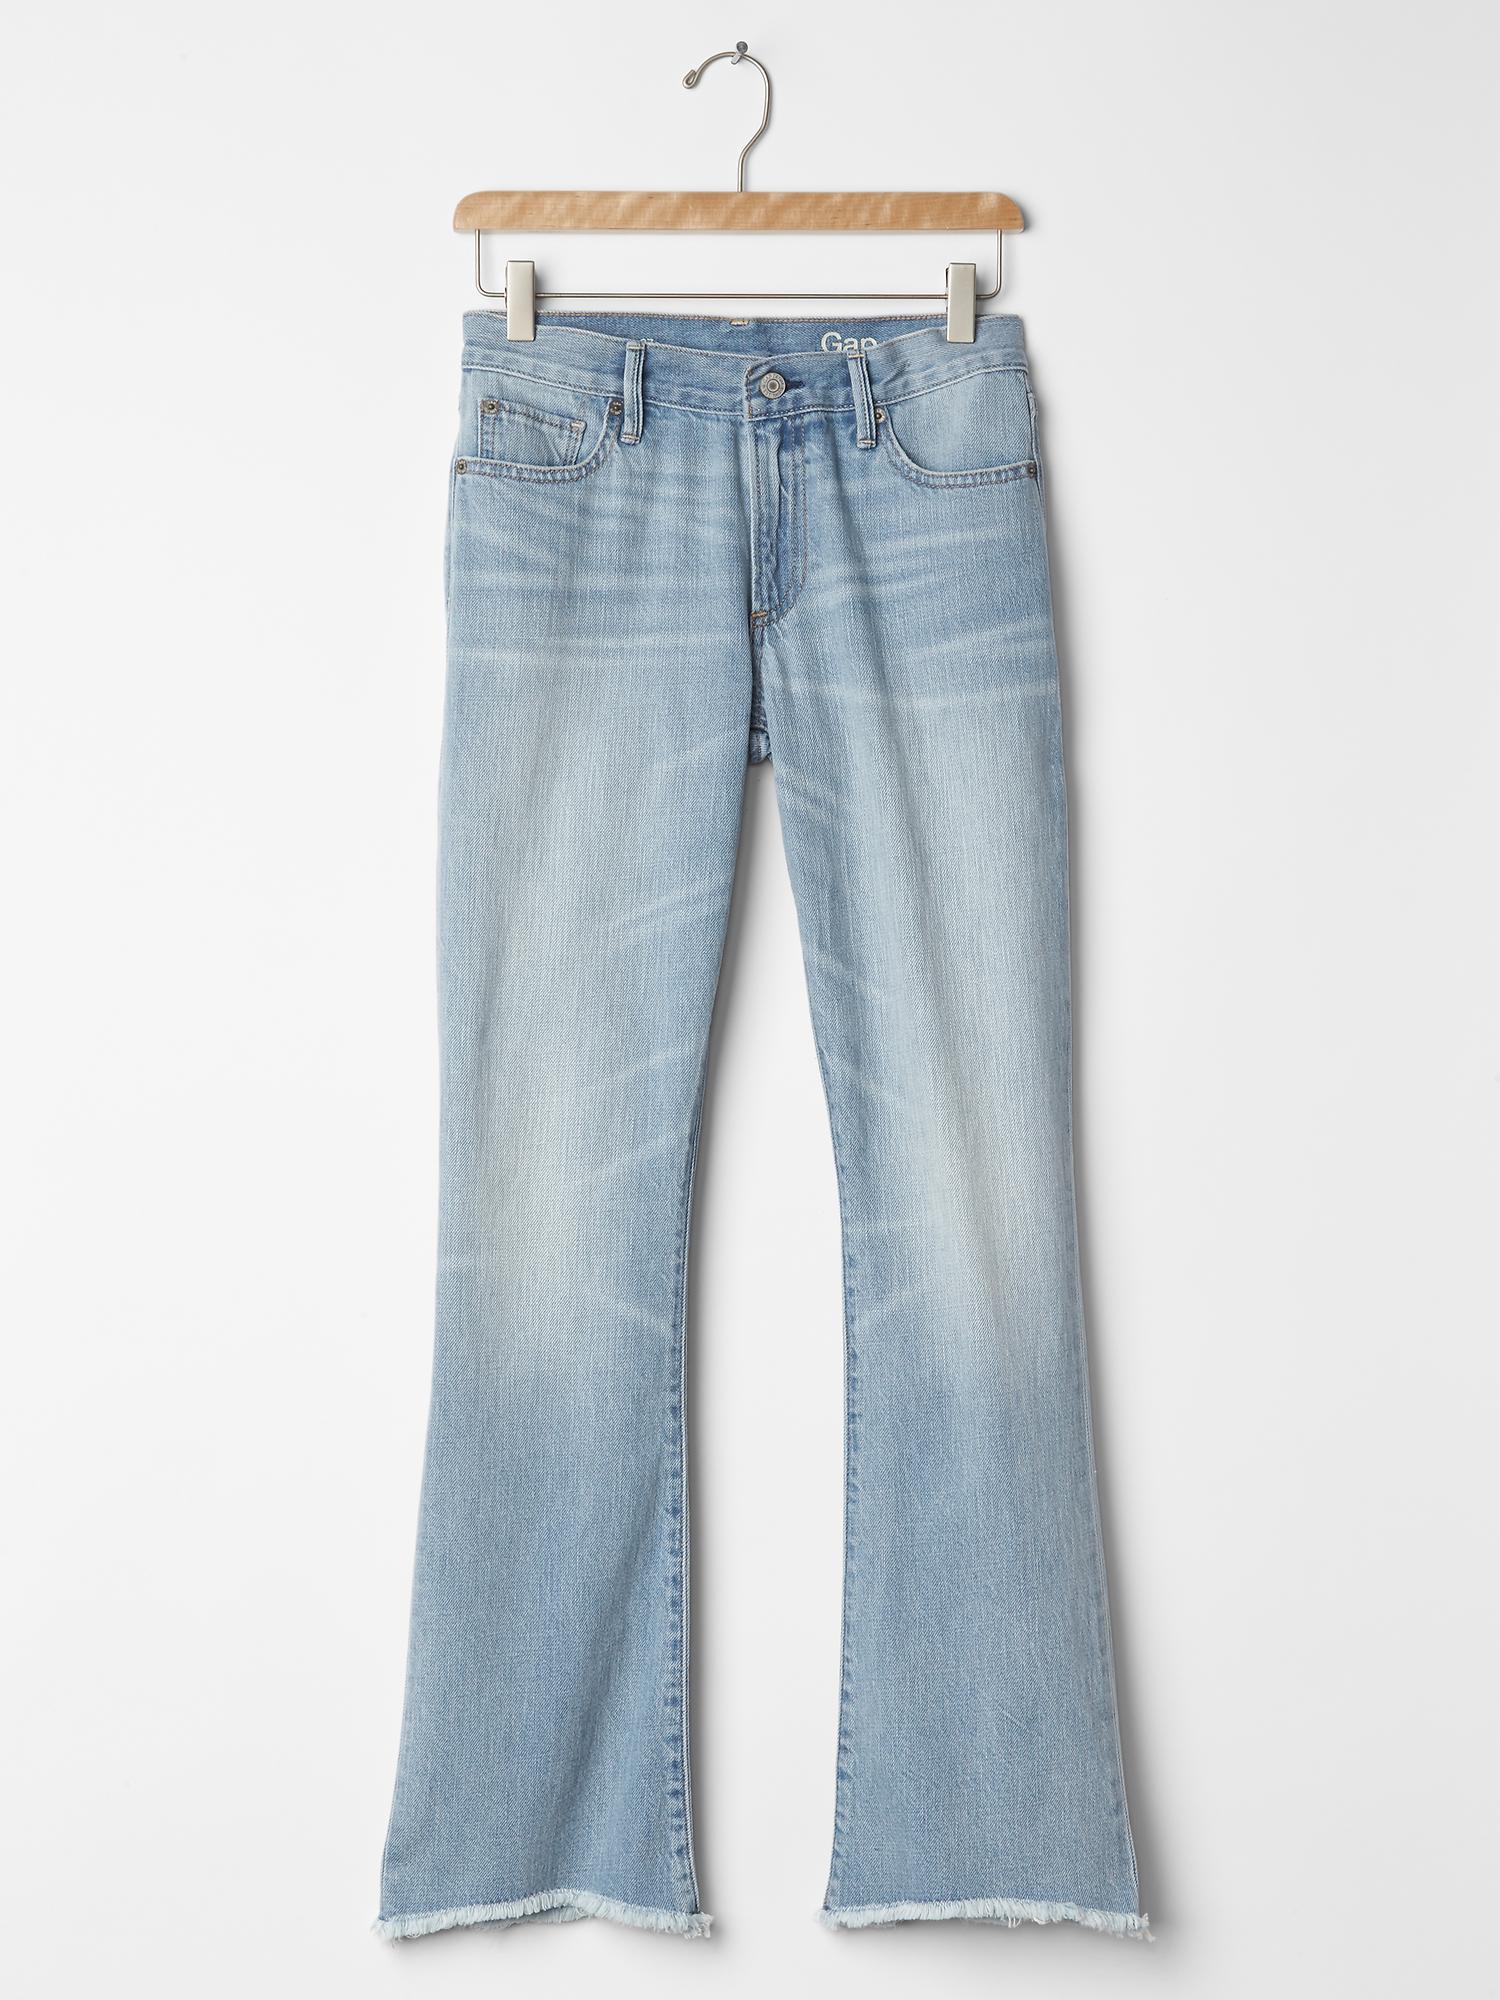 These Fierce Flare Jeans From Gap Are 60% Off Just in Time for Spring